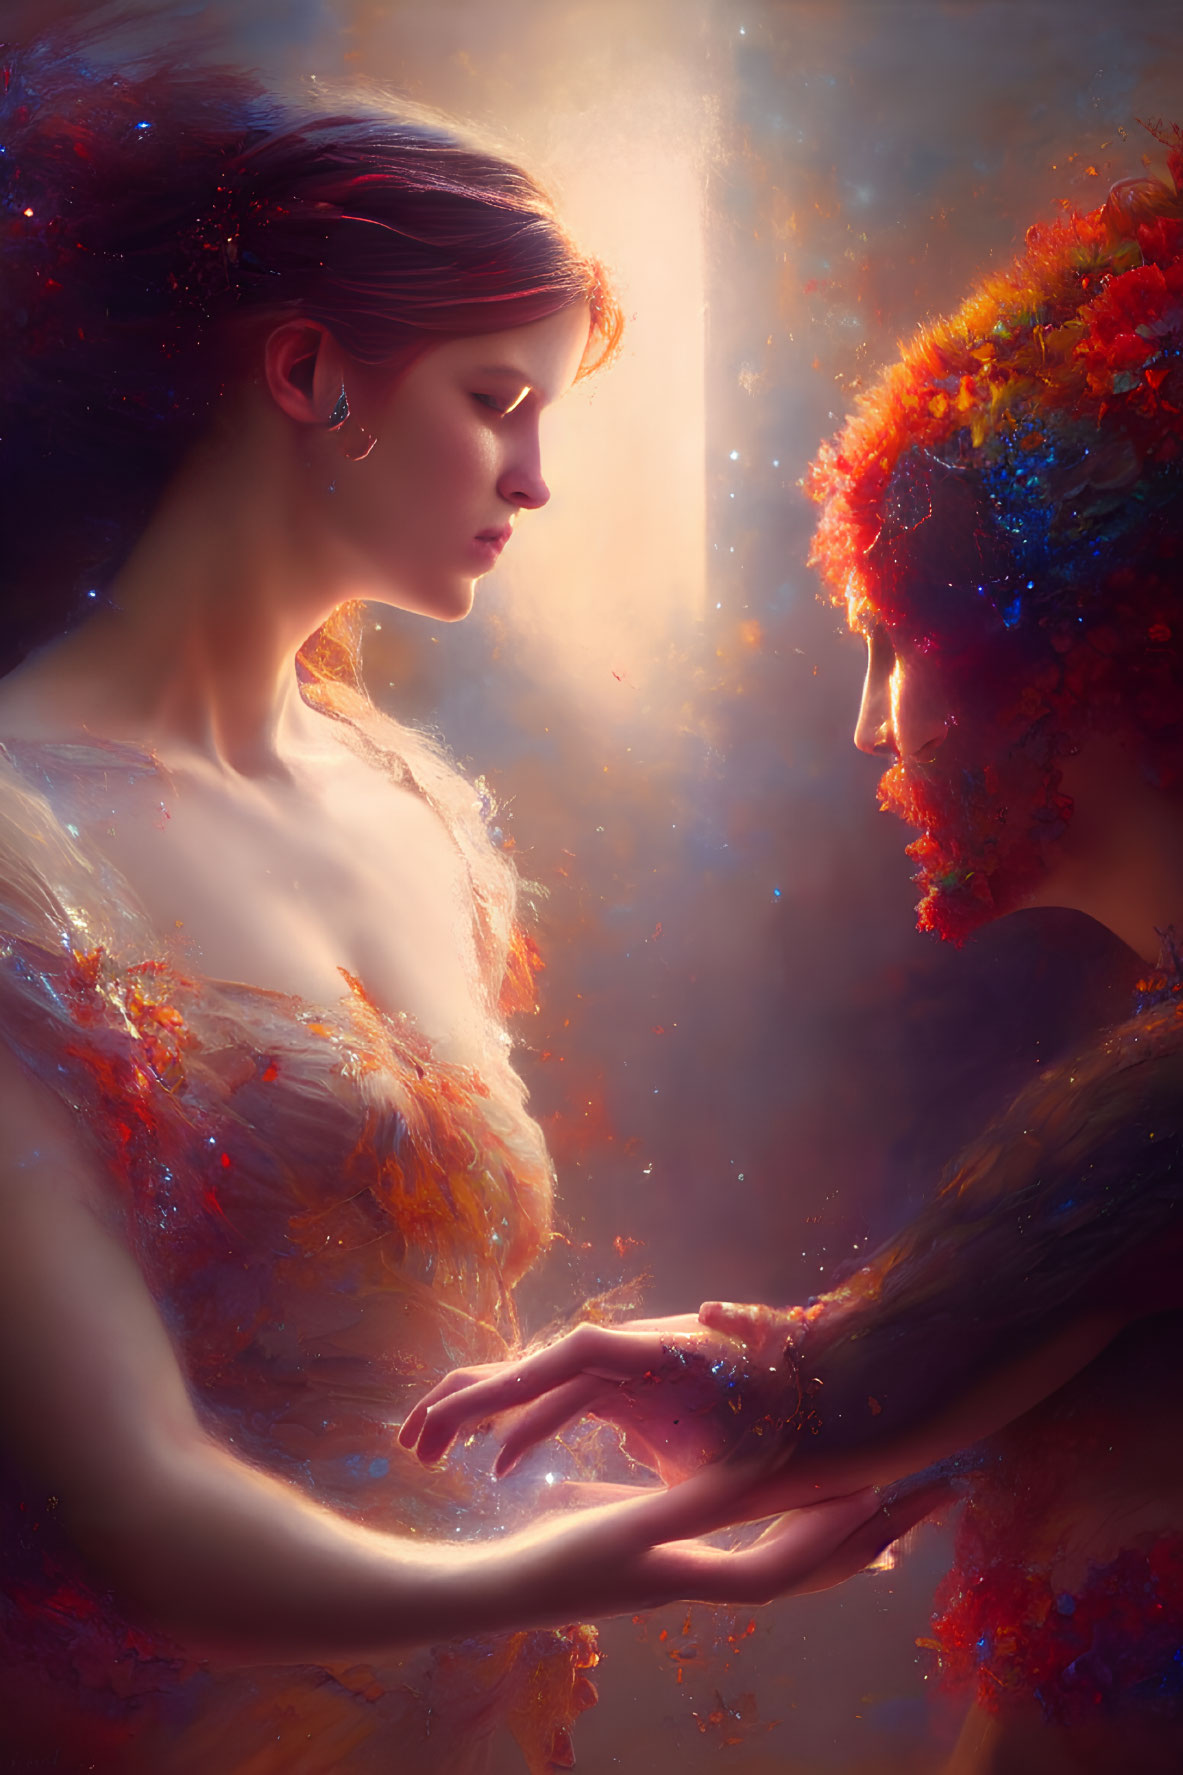 Ethereal figures with vibrant, colorful textures touching hands in warm, glowing light